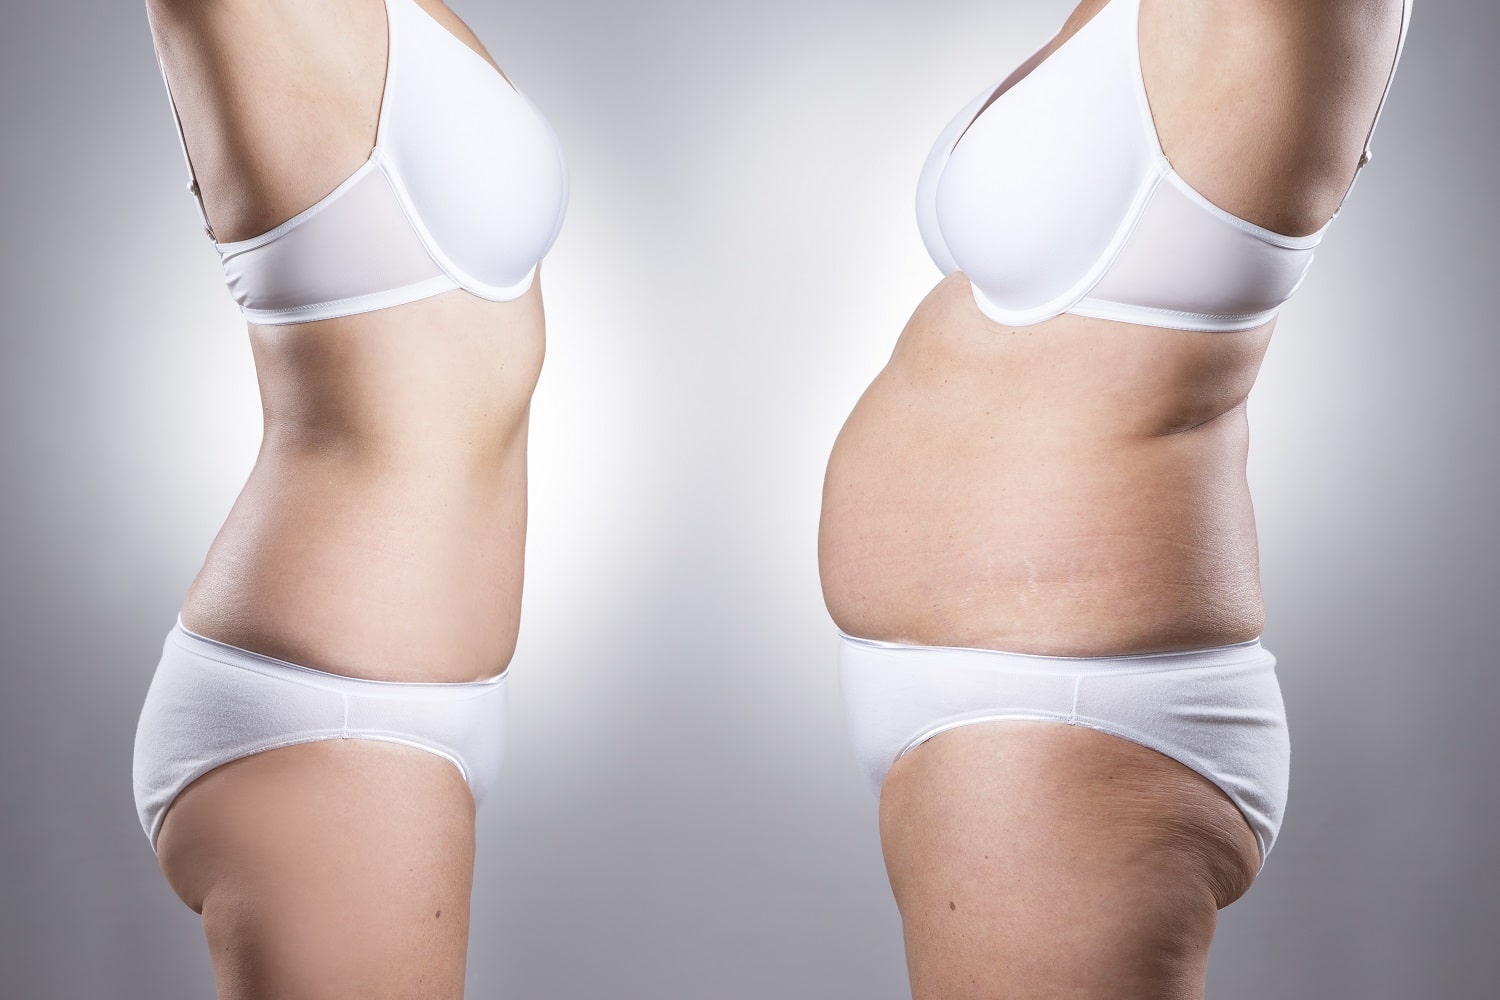 Can Tummy Tuck Surgery be Covered by Insurance? - George P. Chatson, M.D.